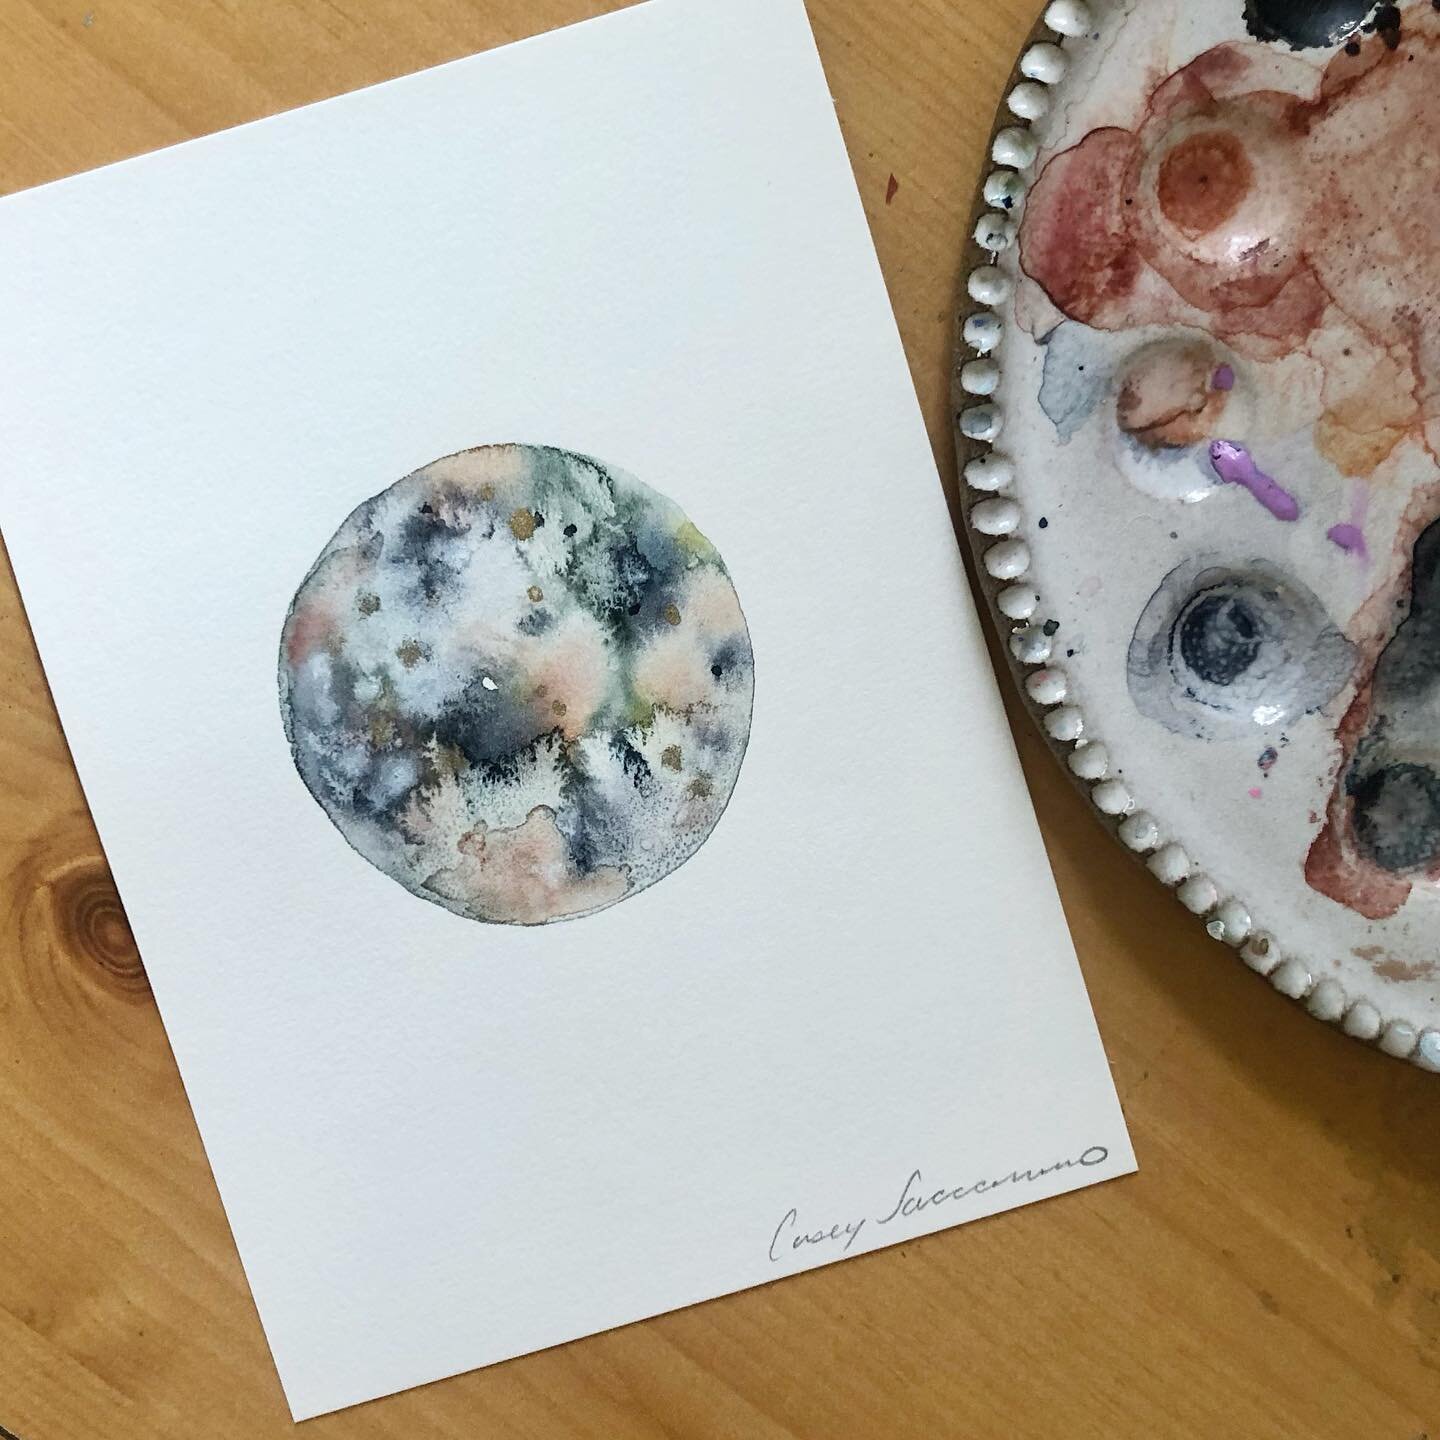 Moons are my favorite subject matter when I need to relinquish control over the paint &amp; allow the water to take control. These minis are list on my website shop &amp; will be available at my next @berwynfarmersmarket date on 10/15